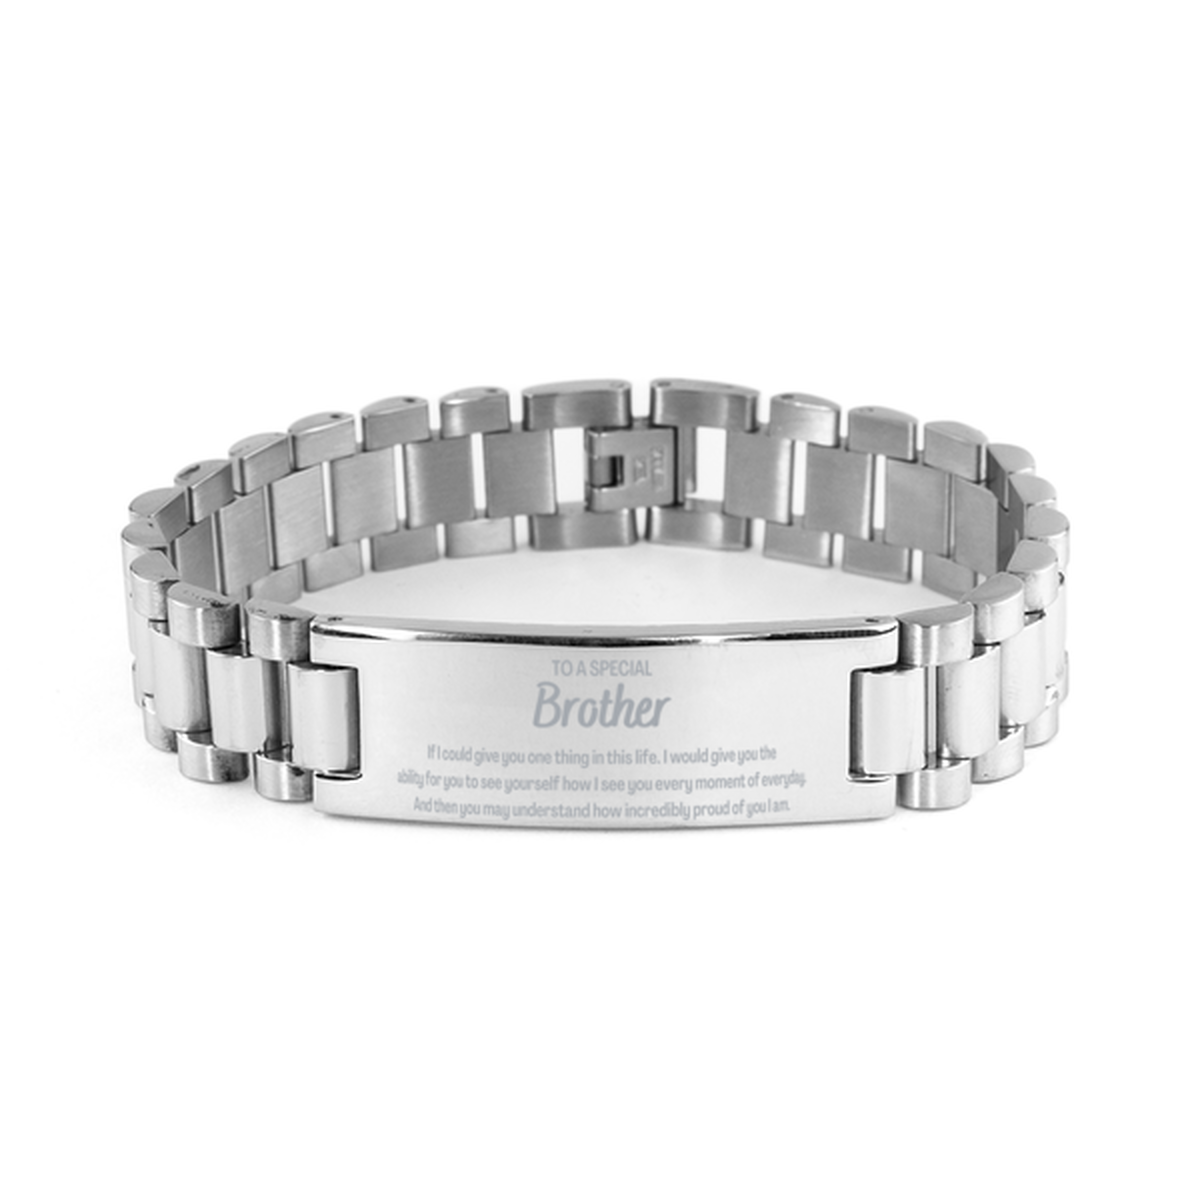 To My Brother Ladder Stainless Steel Bracelet, Gifts For Brother Engraved, Inspirational Gifts for Christmas Birthday, Epic Gifts for Brother To A Special Brother how incredibly proud of you I am